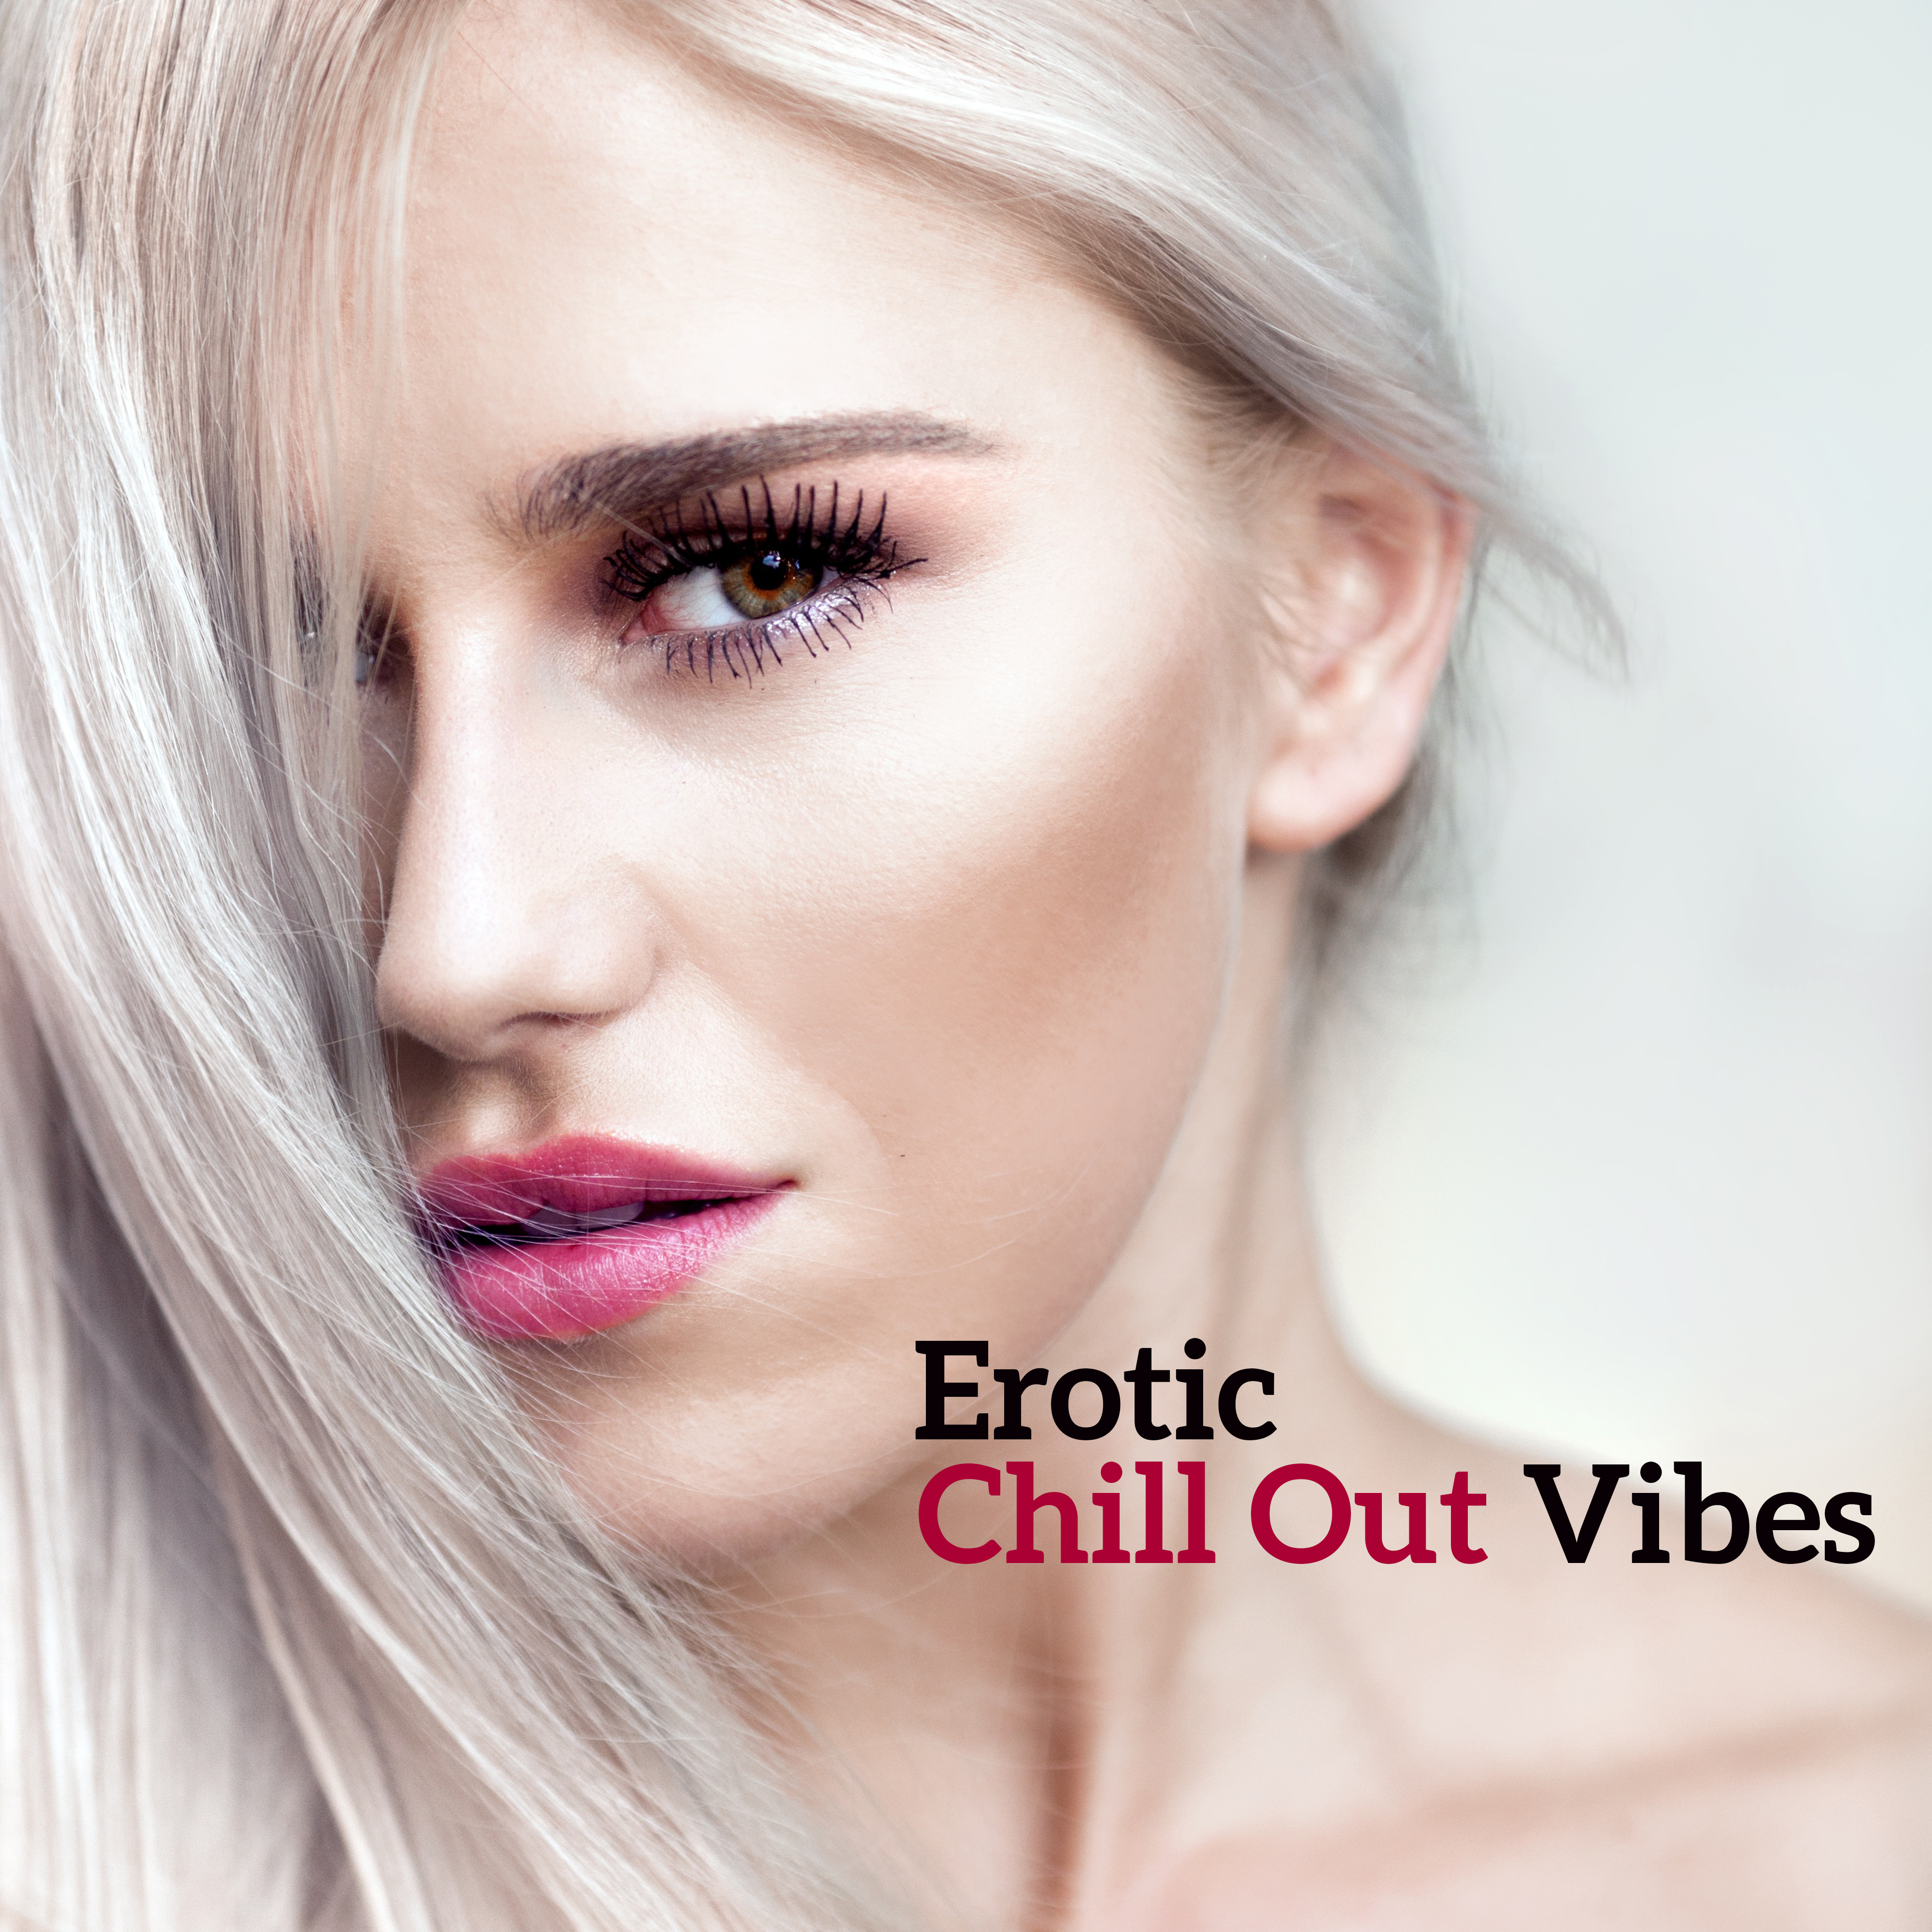 Erotic Chill Out Vibes – Hot Summer Vibes, Melodies for Lovers, Sensual Chill Out Music